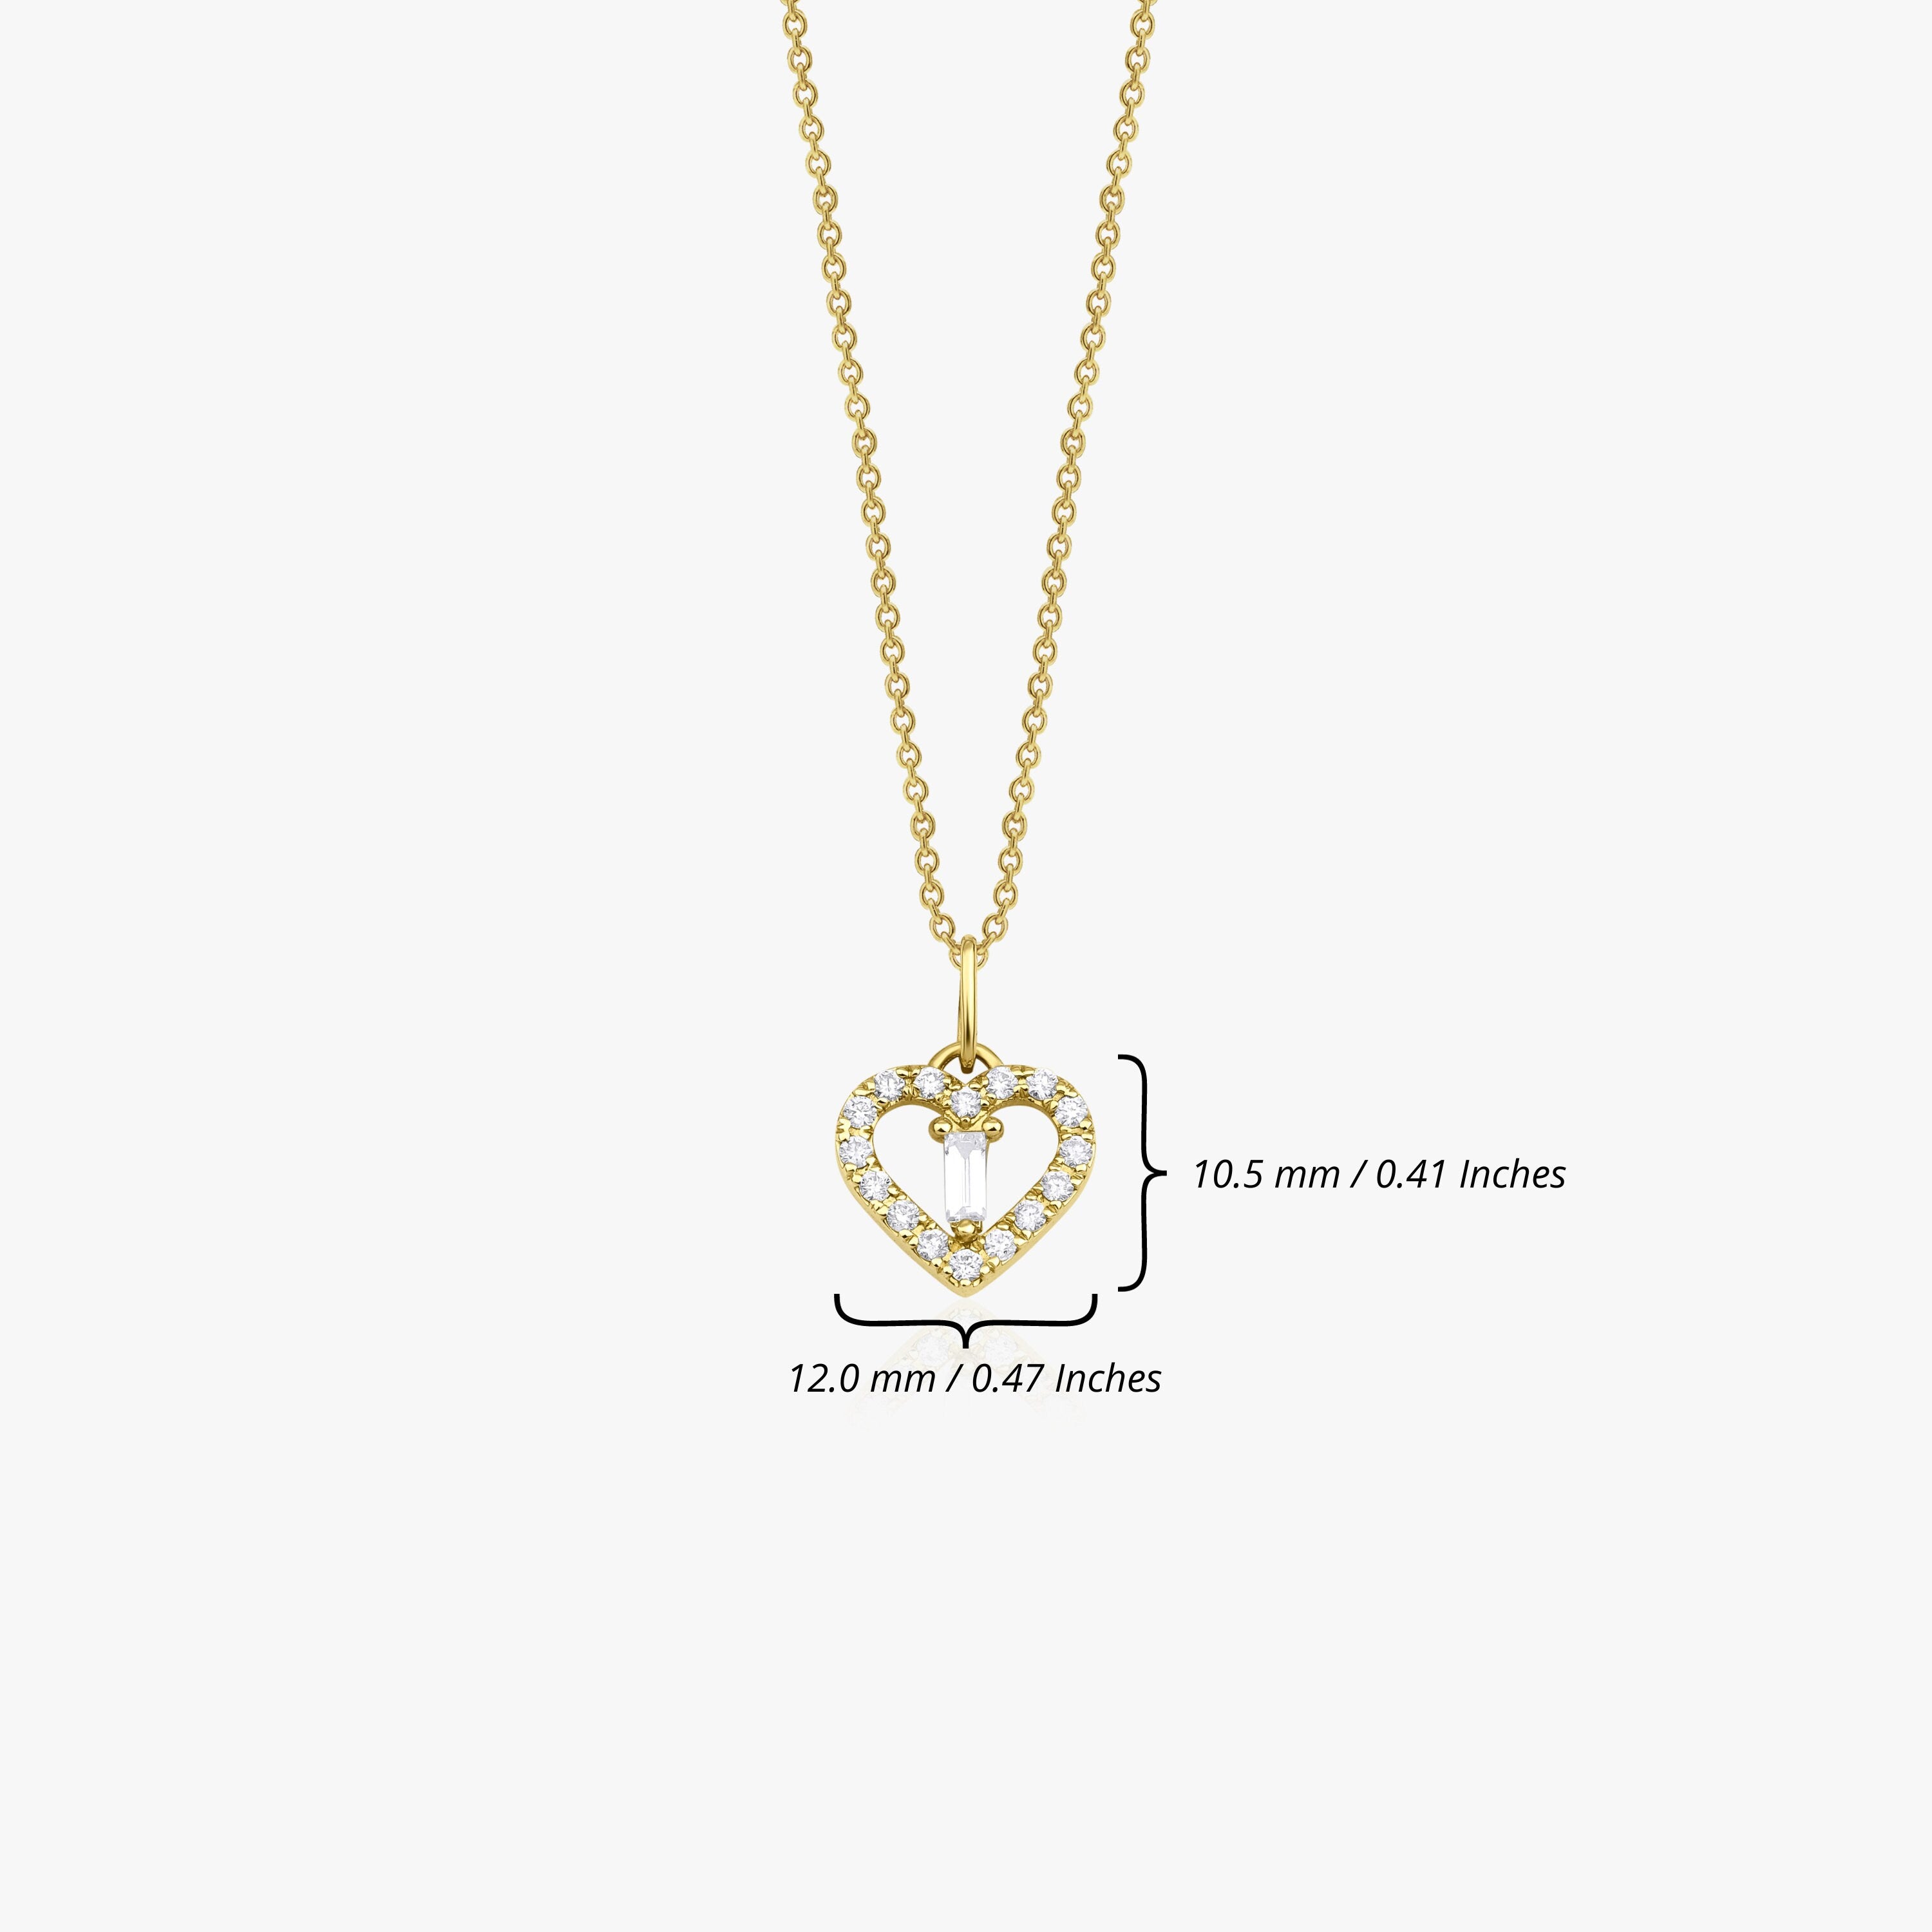 Diamond Heart Pendant Necklace Available in 14K and 18K Gold